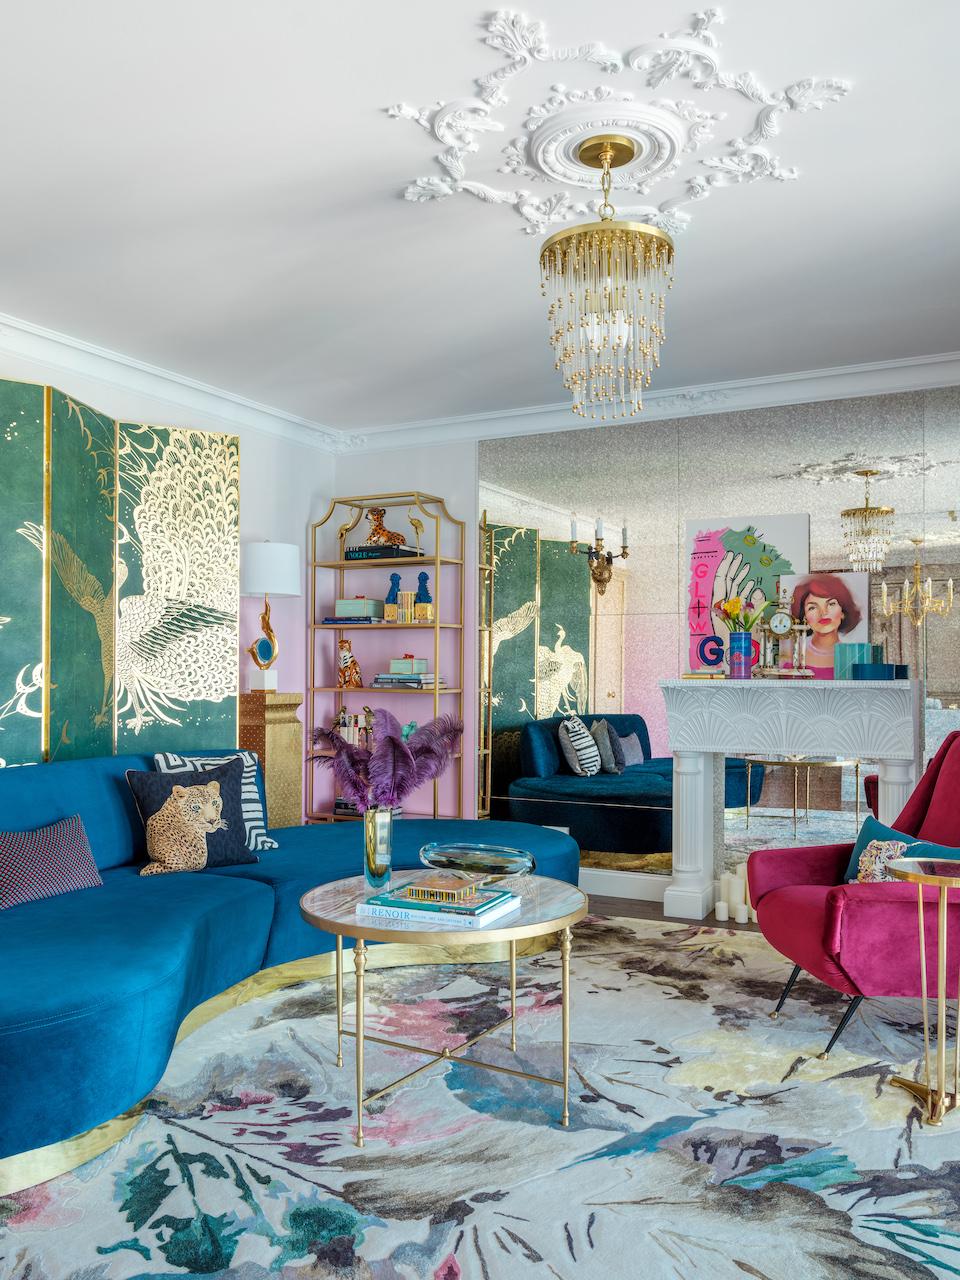 A Multifarious Home in Russia Brimming with Personality